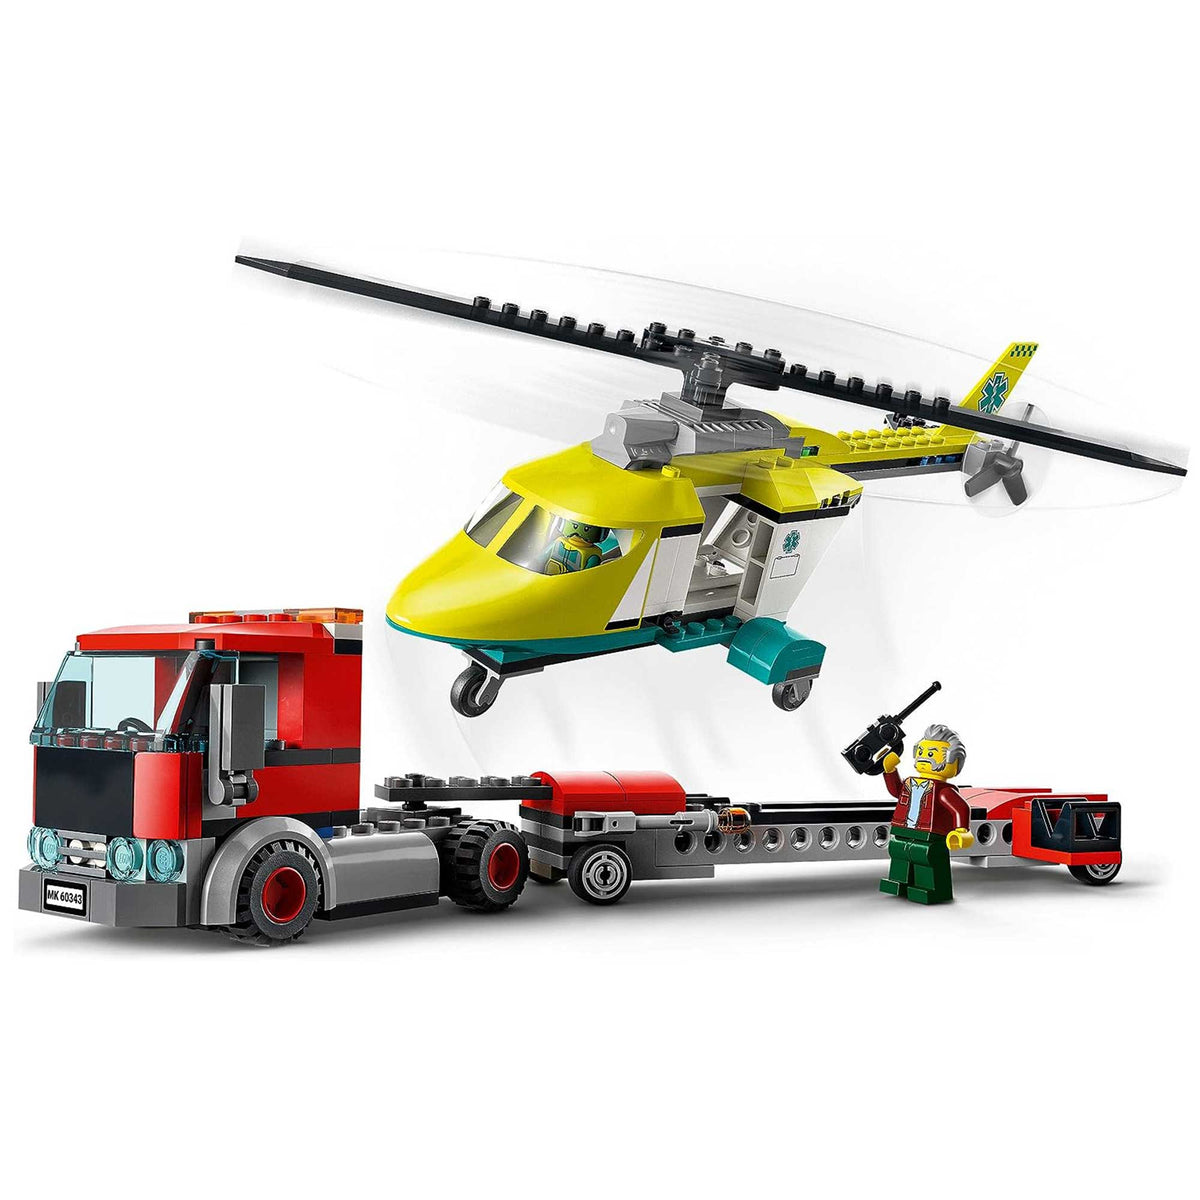 LEGO City Rescue Helicopter Transport Toy Building Set